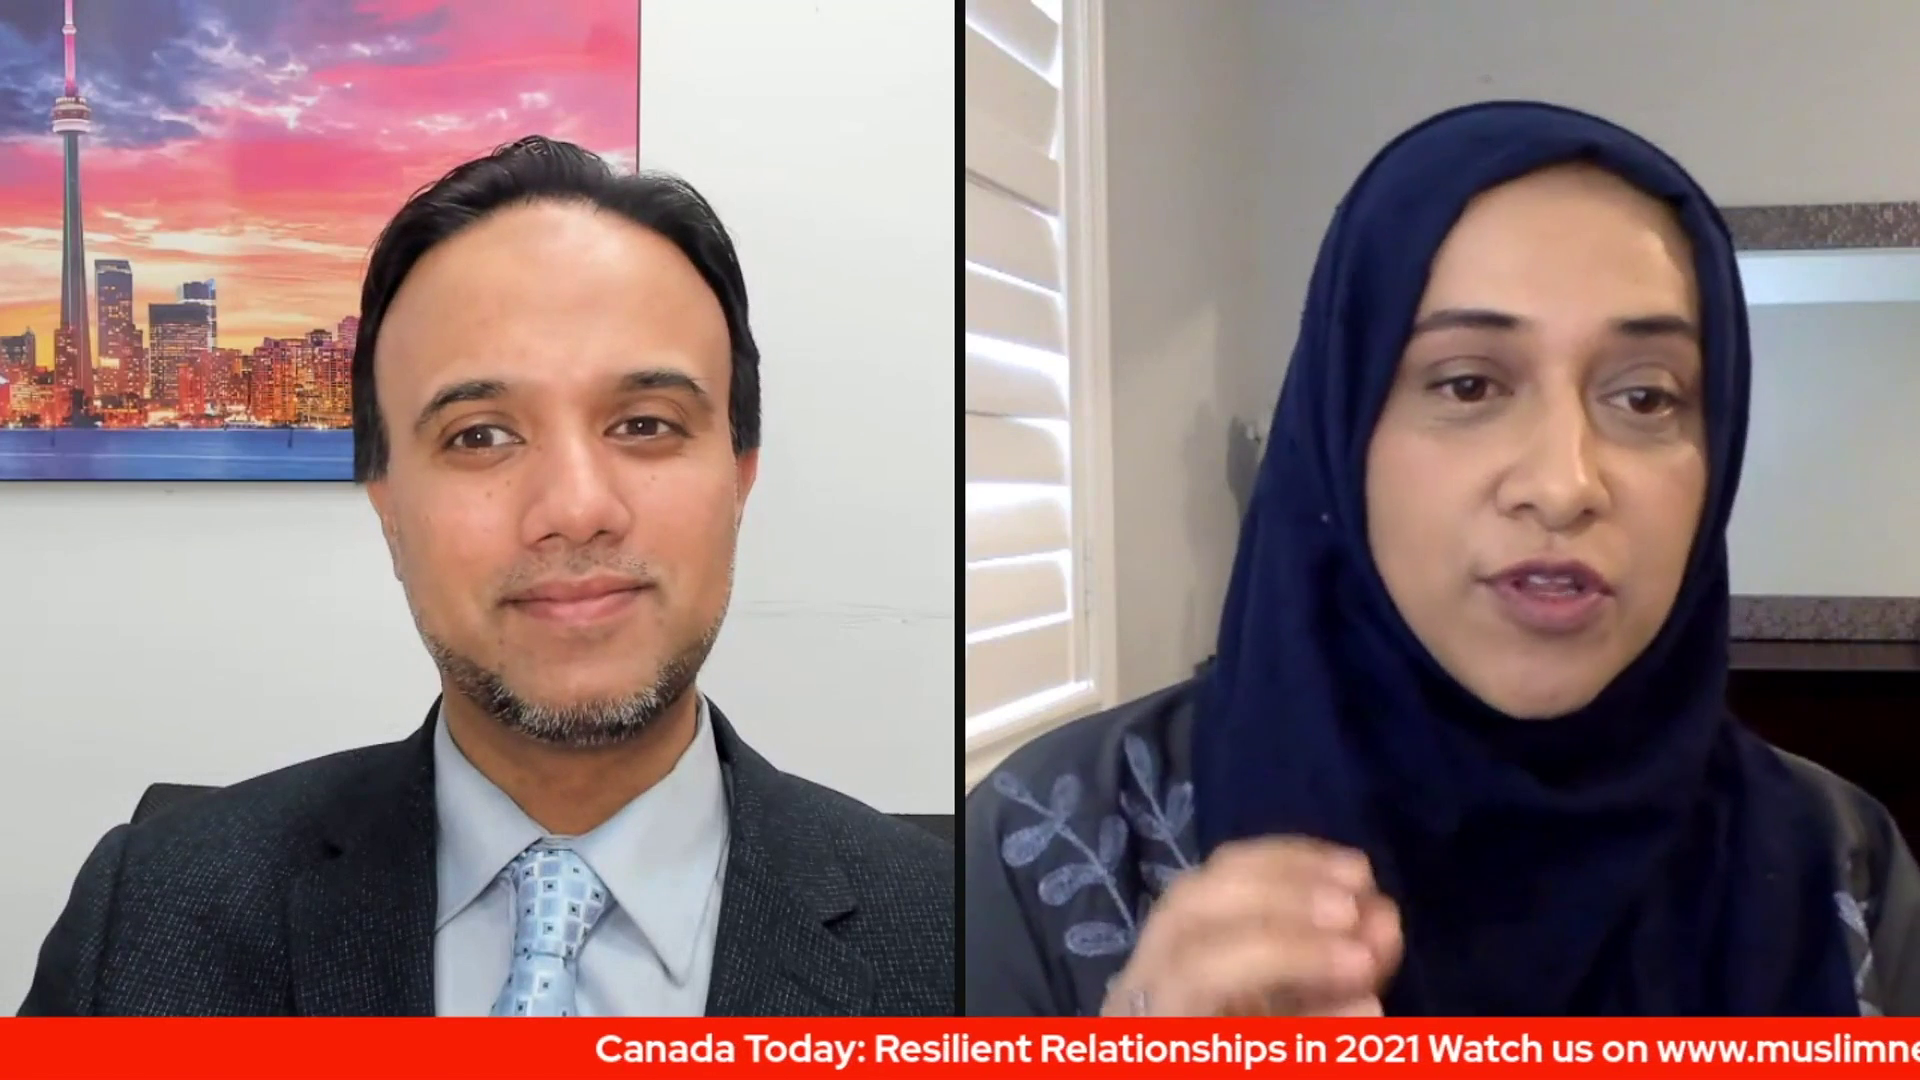 Resilient Relationships in 2021